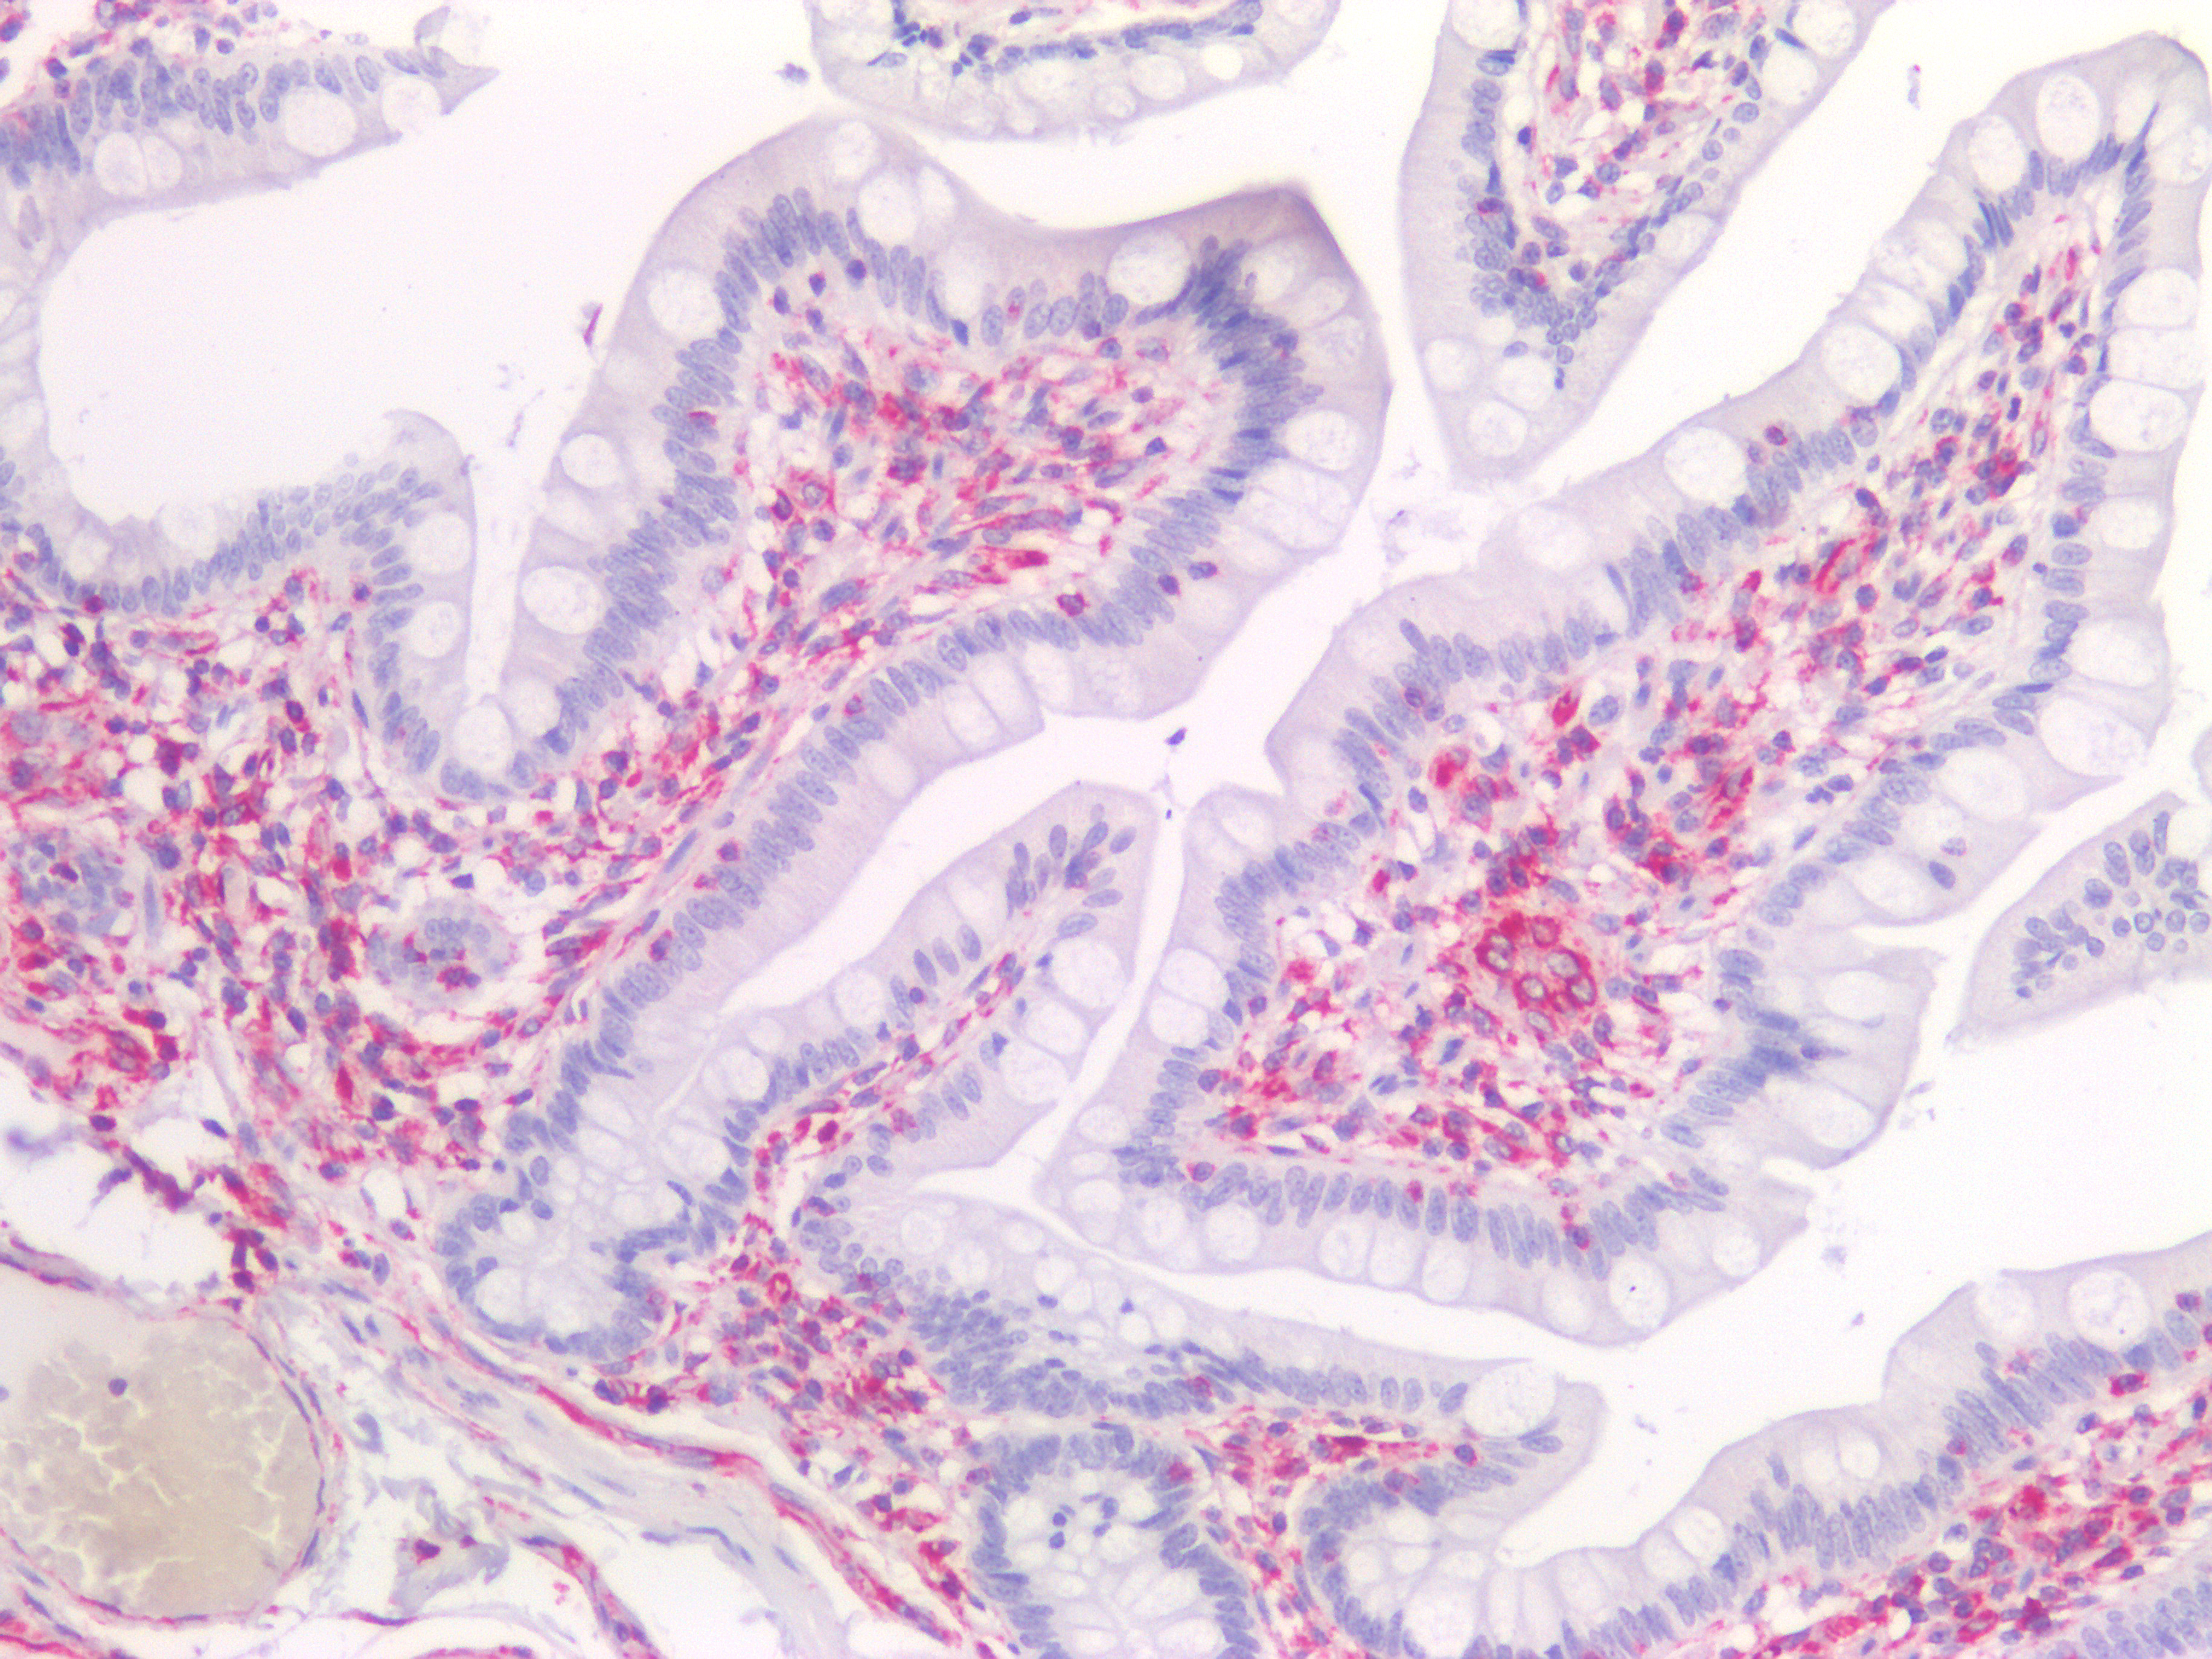 Figure 8. Immunostaining of human paraffin embedded tissue sections of human small intestine with MUB1904P (diluted 1:200), showing the specific pattern of vimentin in the mesenchymal cell types, such as fibroblasts in the connective tissue. As expected, no reactivity is seen in the epithelial cell compartment.